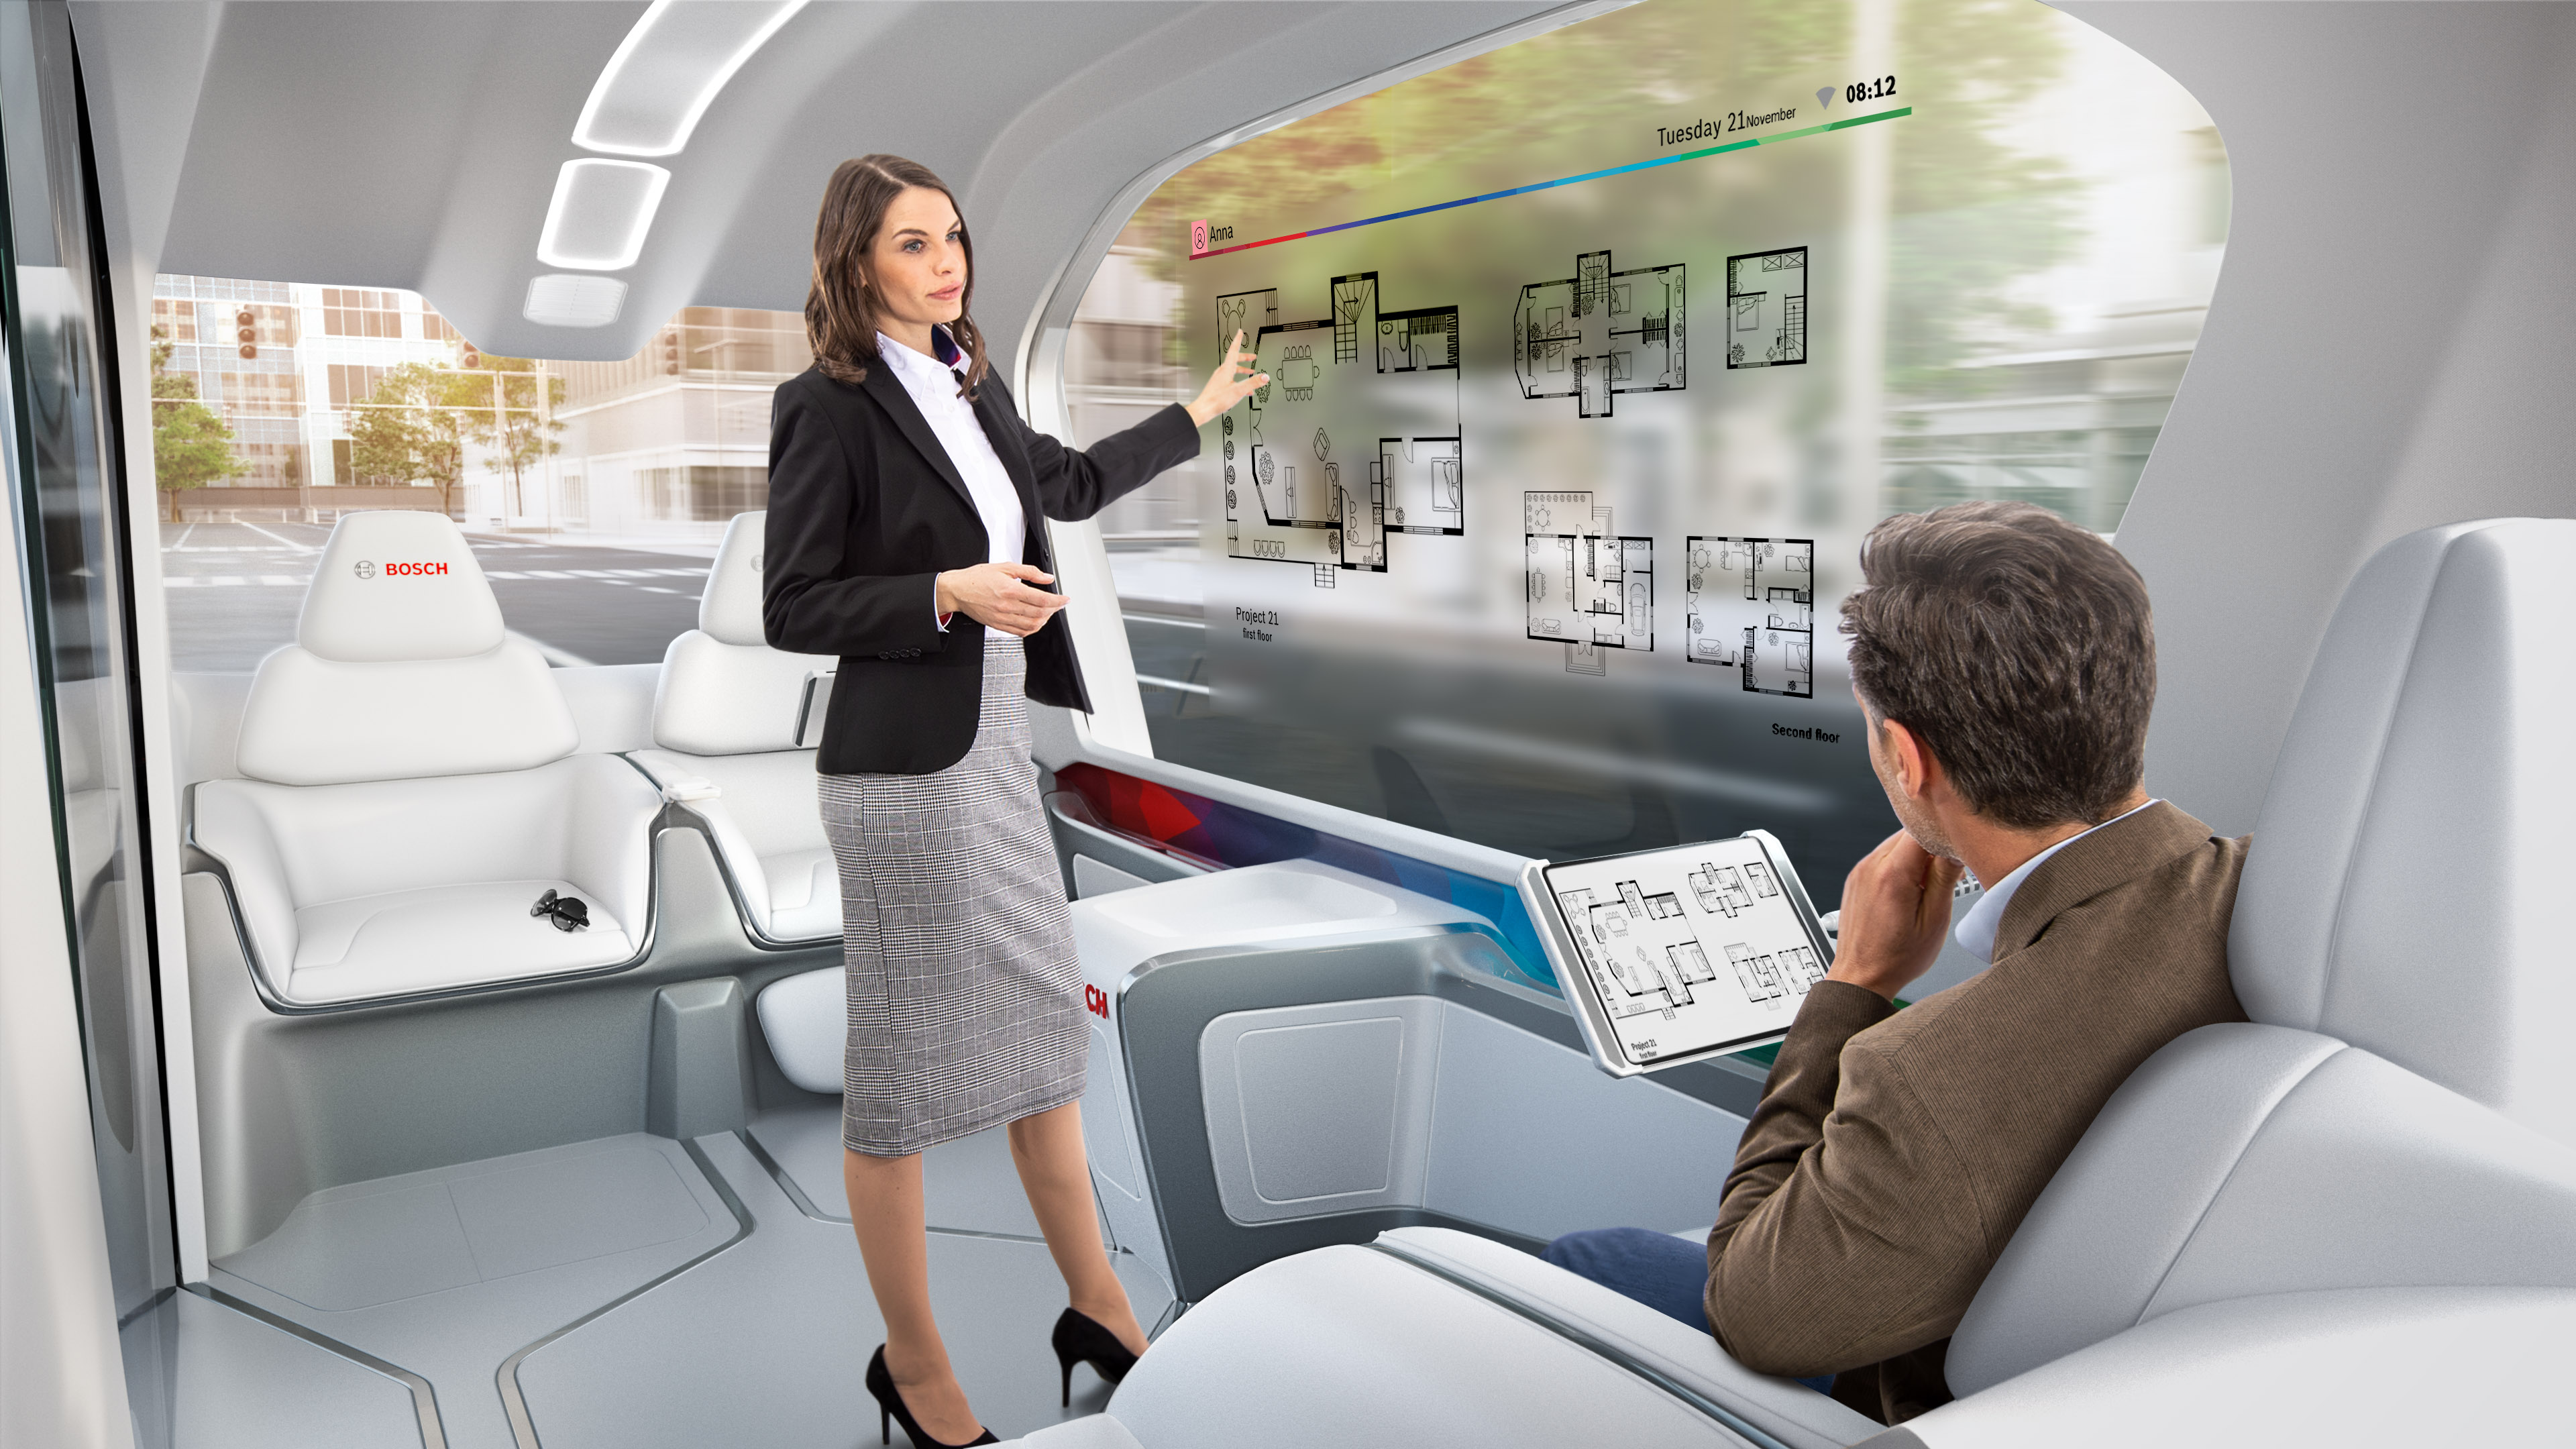 Mobility services from Bosch for a comfortable interior